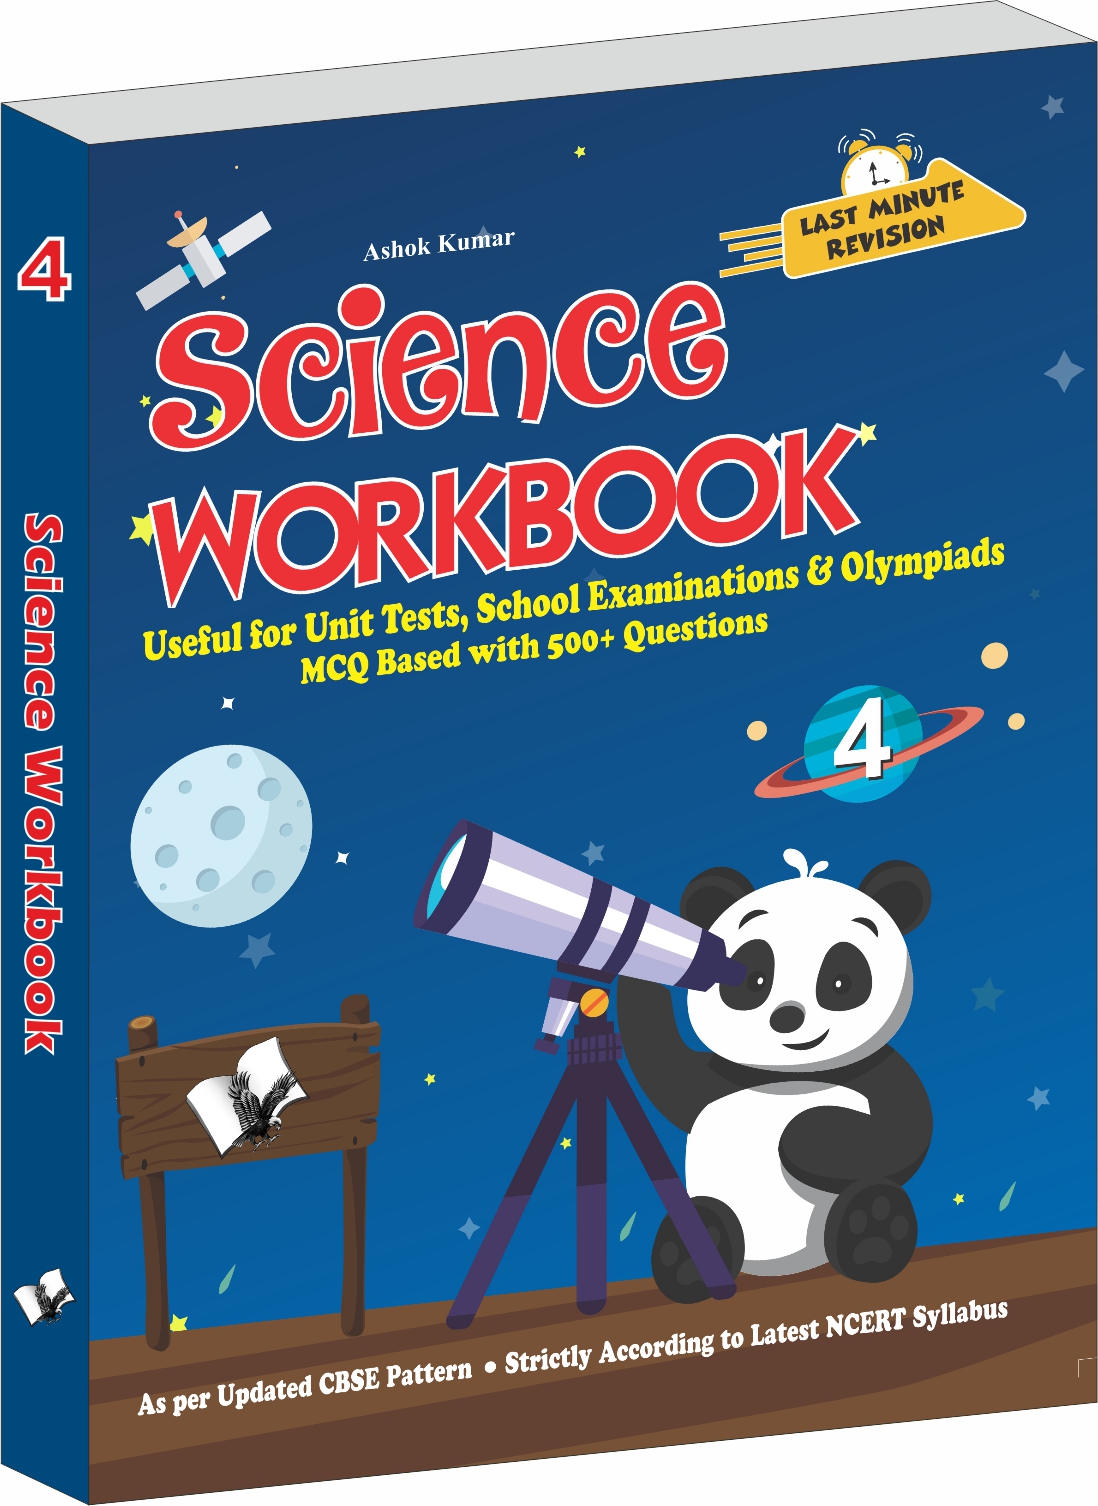 science-workbook-class-4-useful-for-unit-tests-school-examinations-olympiads